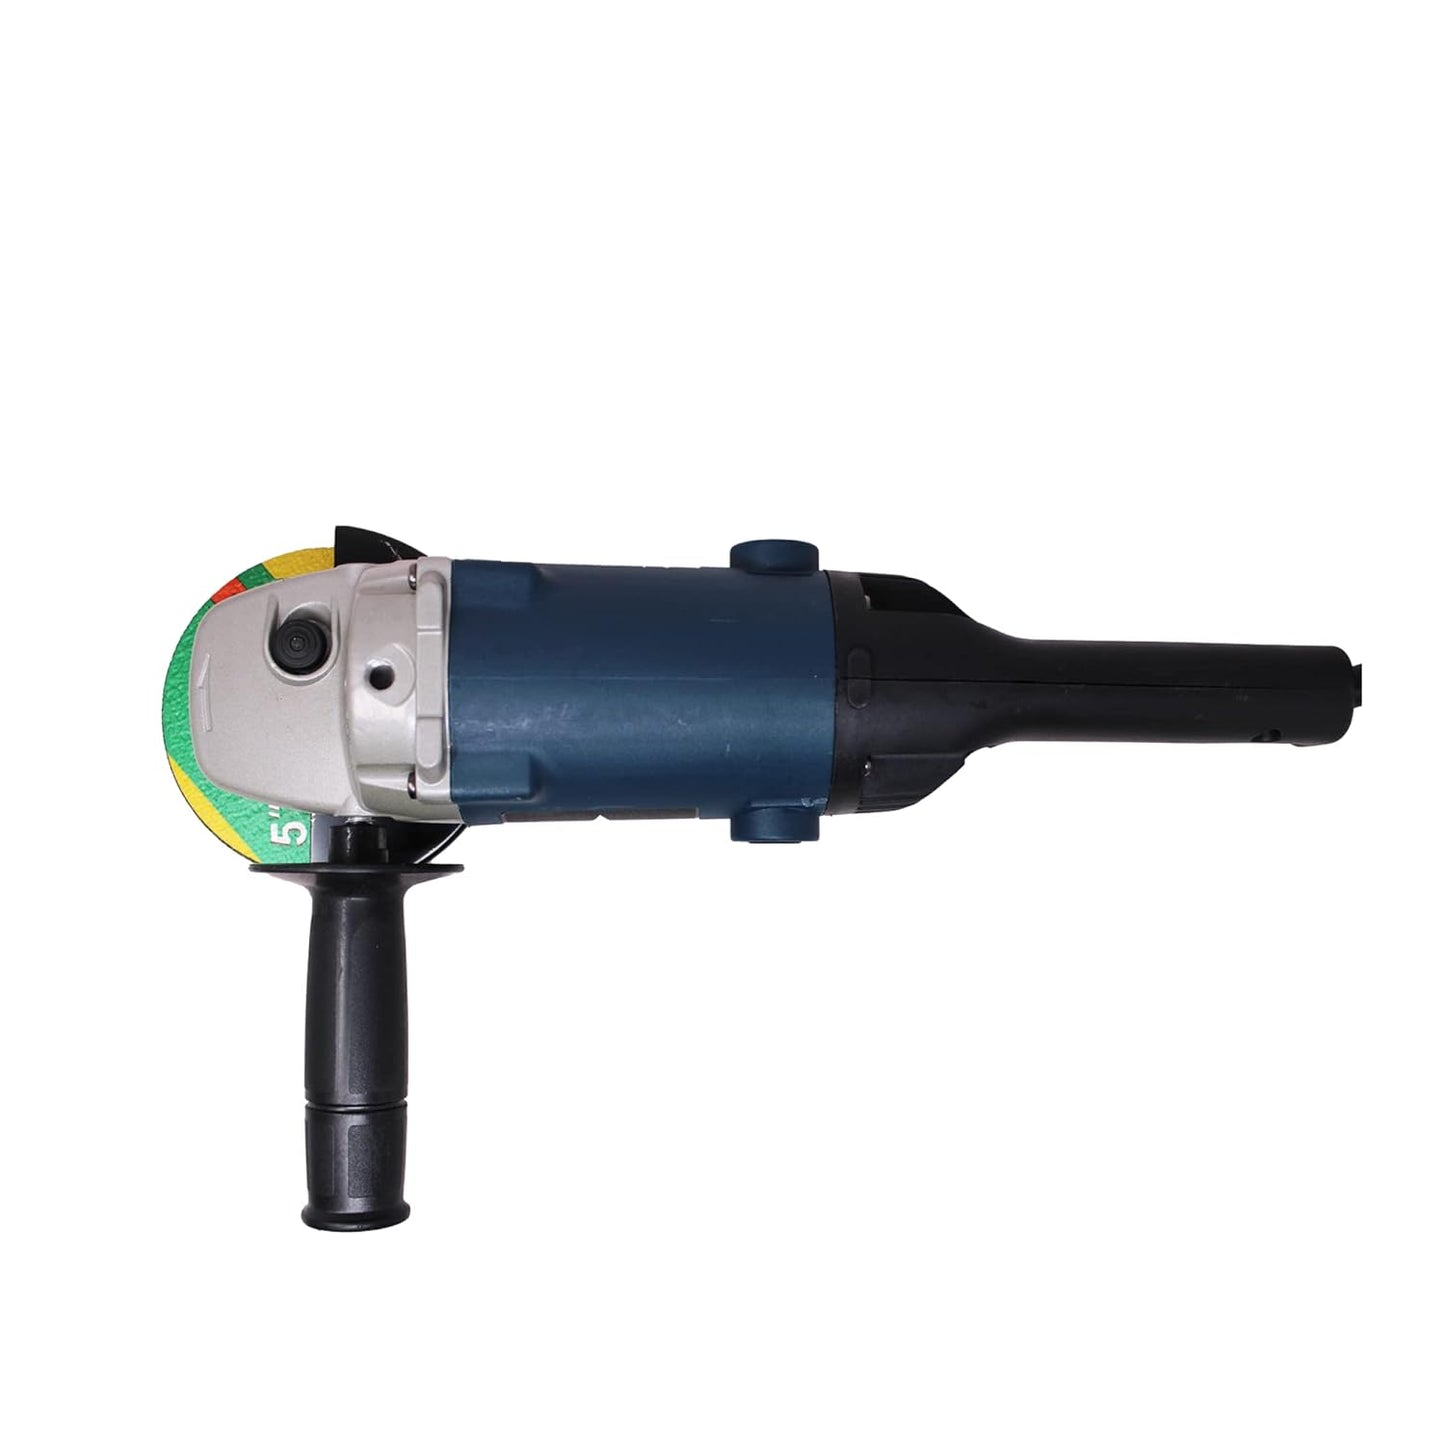 SPEAR SP-AG125 Heavy-Duty Angle Grinder for Grinding, Cutting, Sharpening, Polishing, Removing Rust (1200 W, 5 Inch, 9000 rpm)